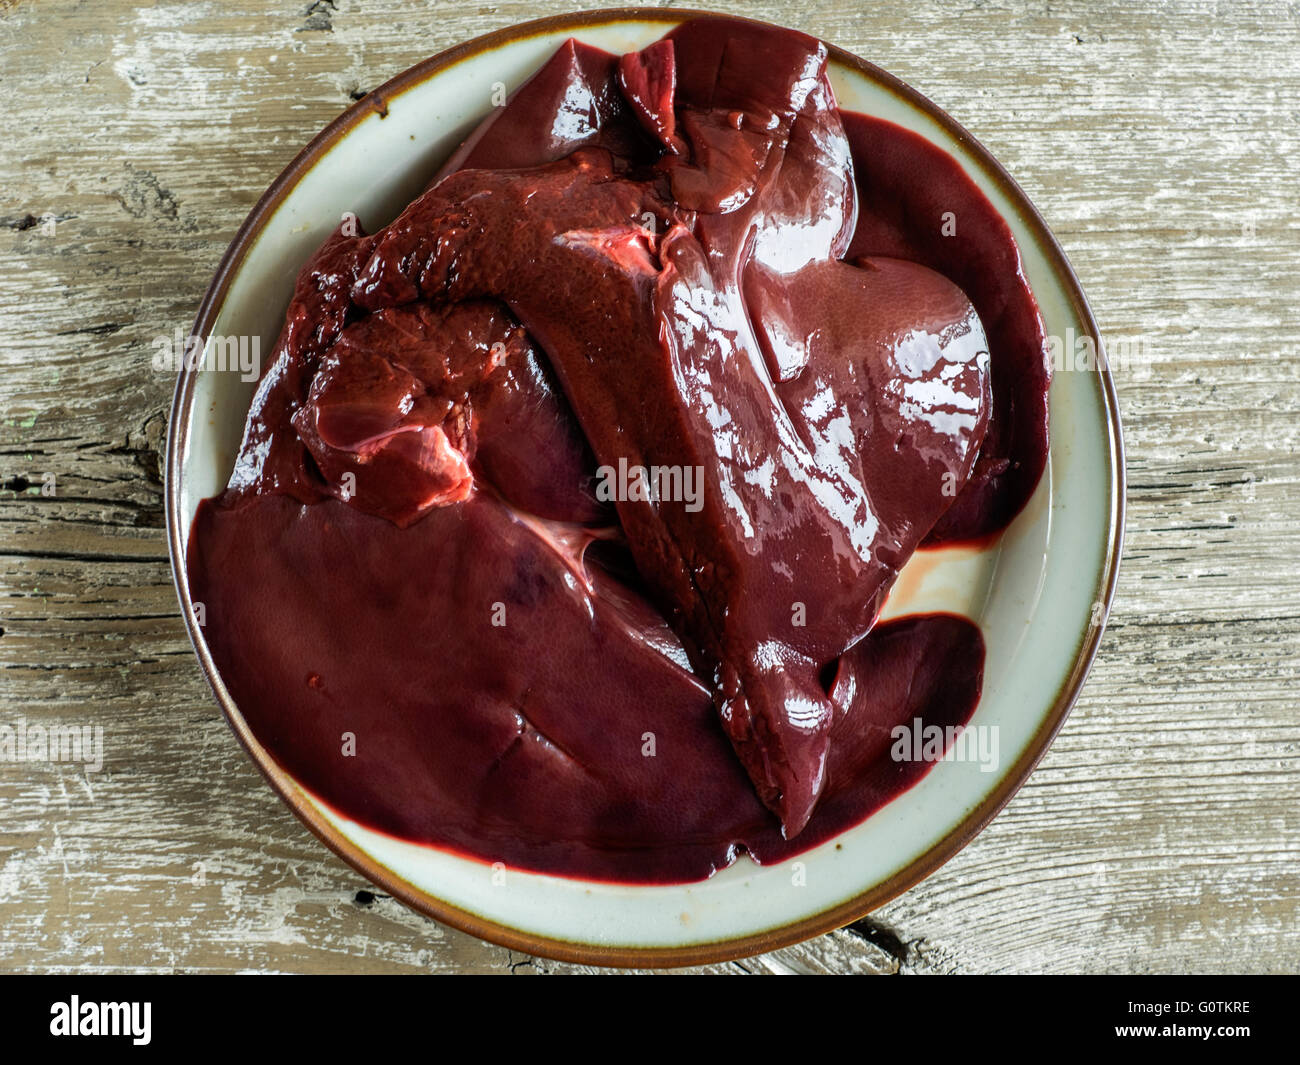 raw pork liver on a plate Stock Photo